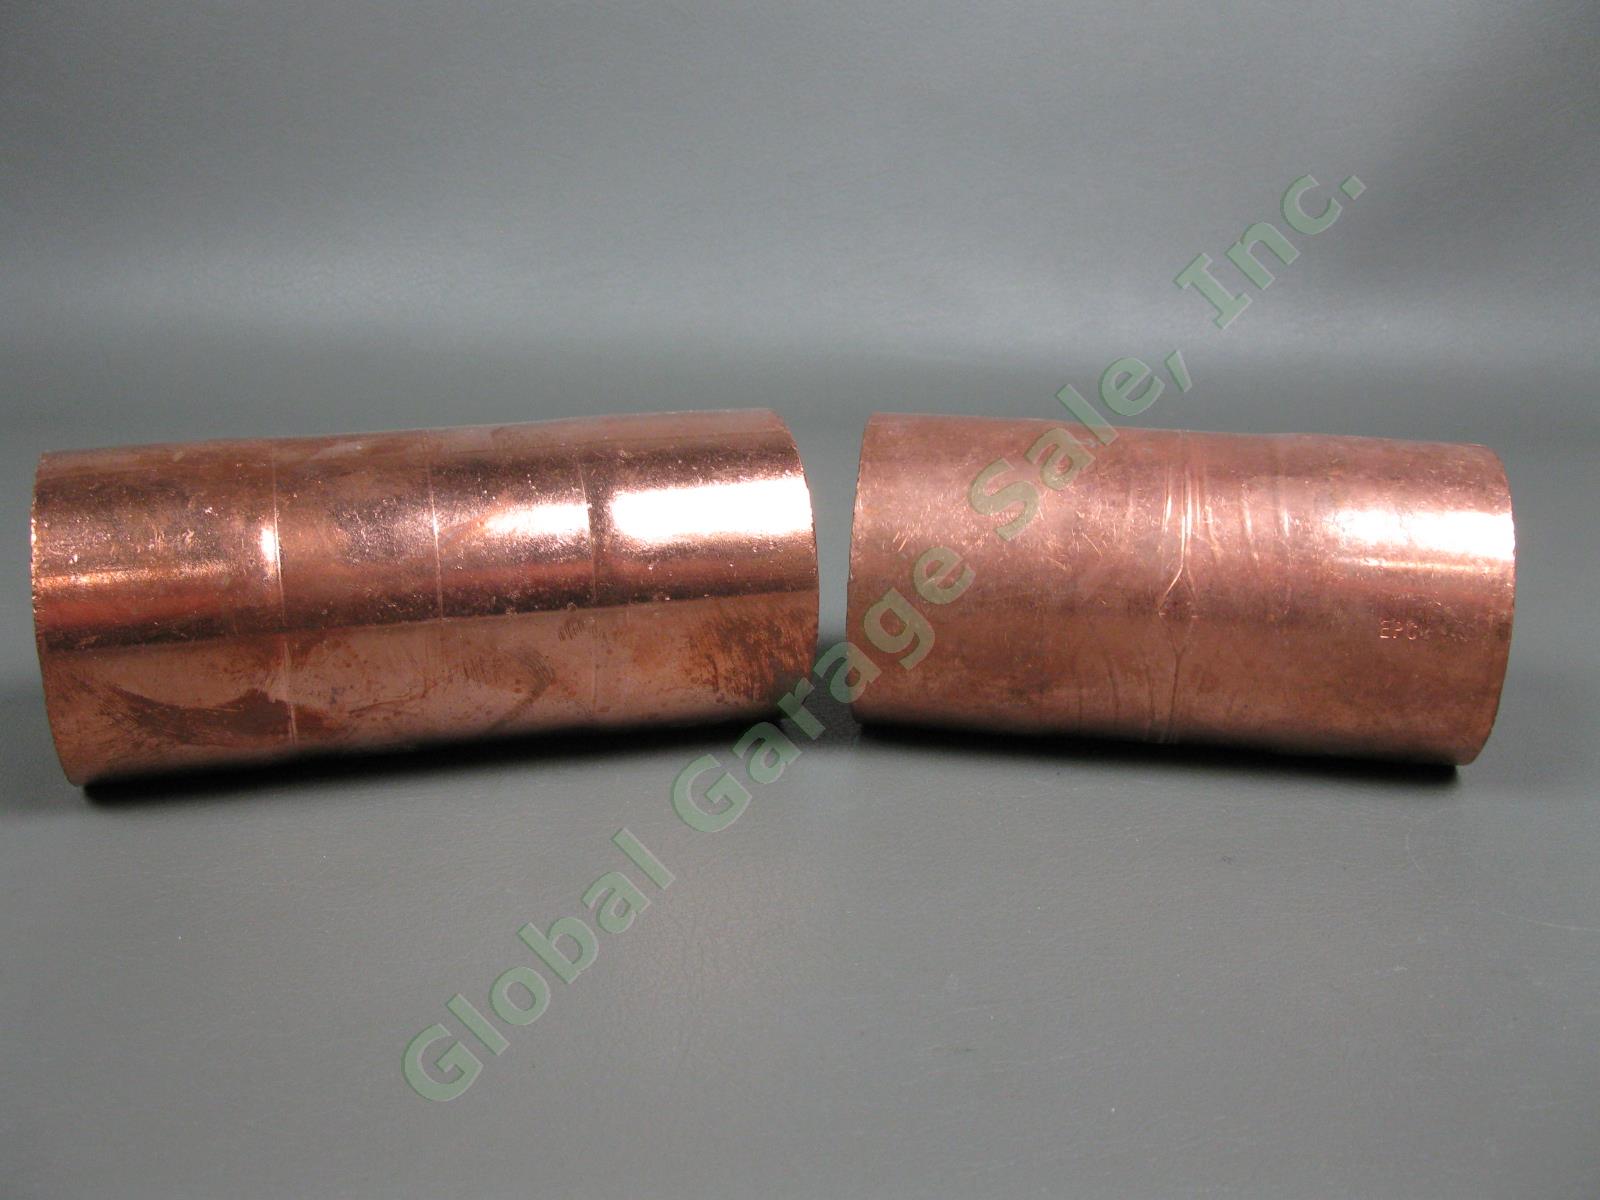 2 NEW Nibco 2" x 2" x 1-1/2" Copper EPC Reducing Sweat Tees Pipe Fittings Pair 5